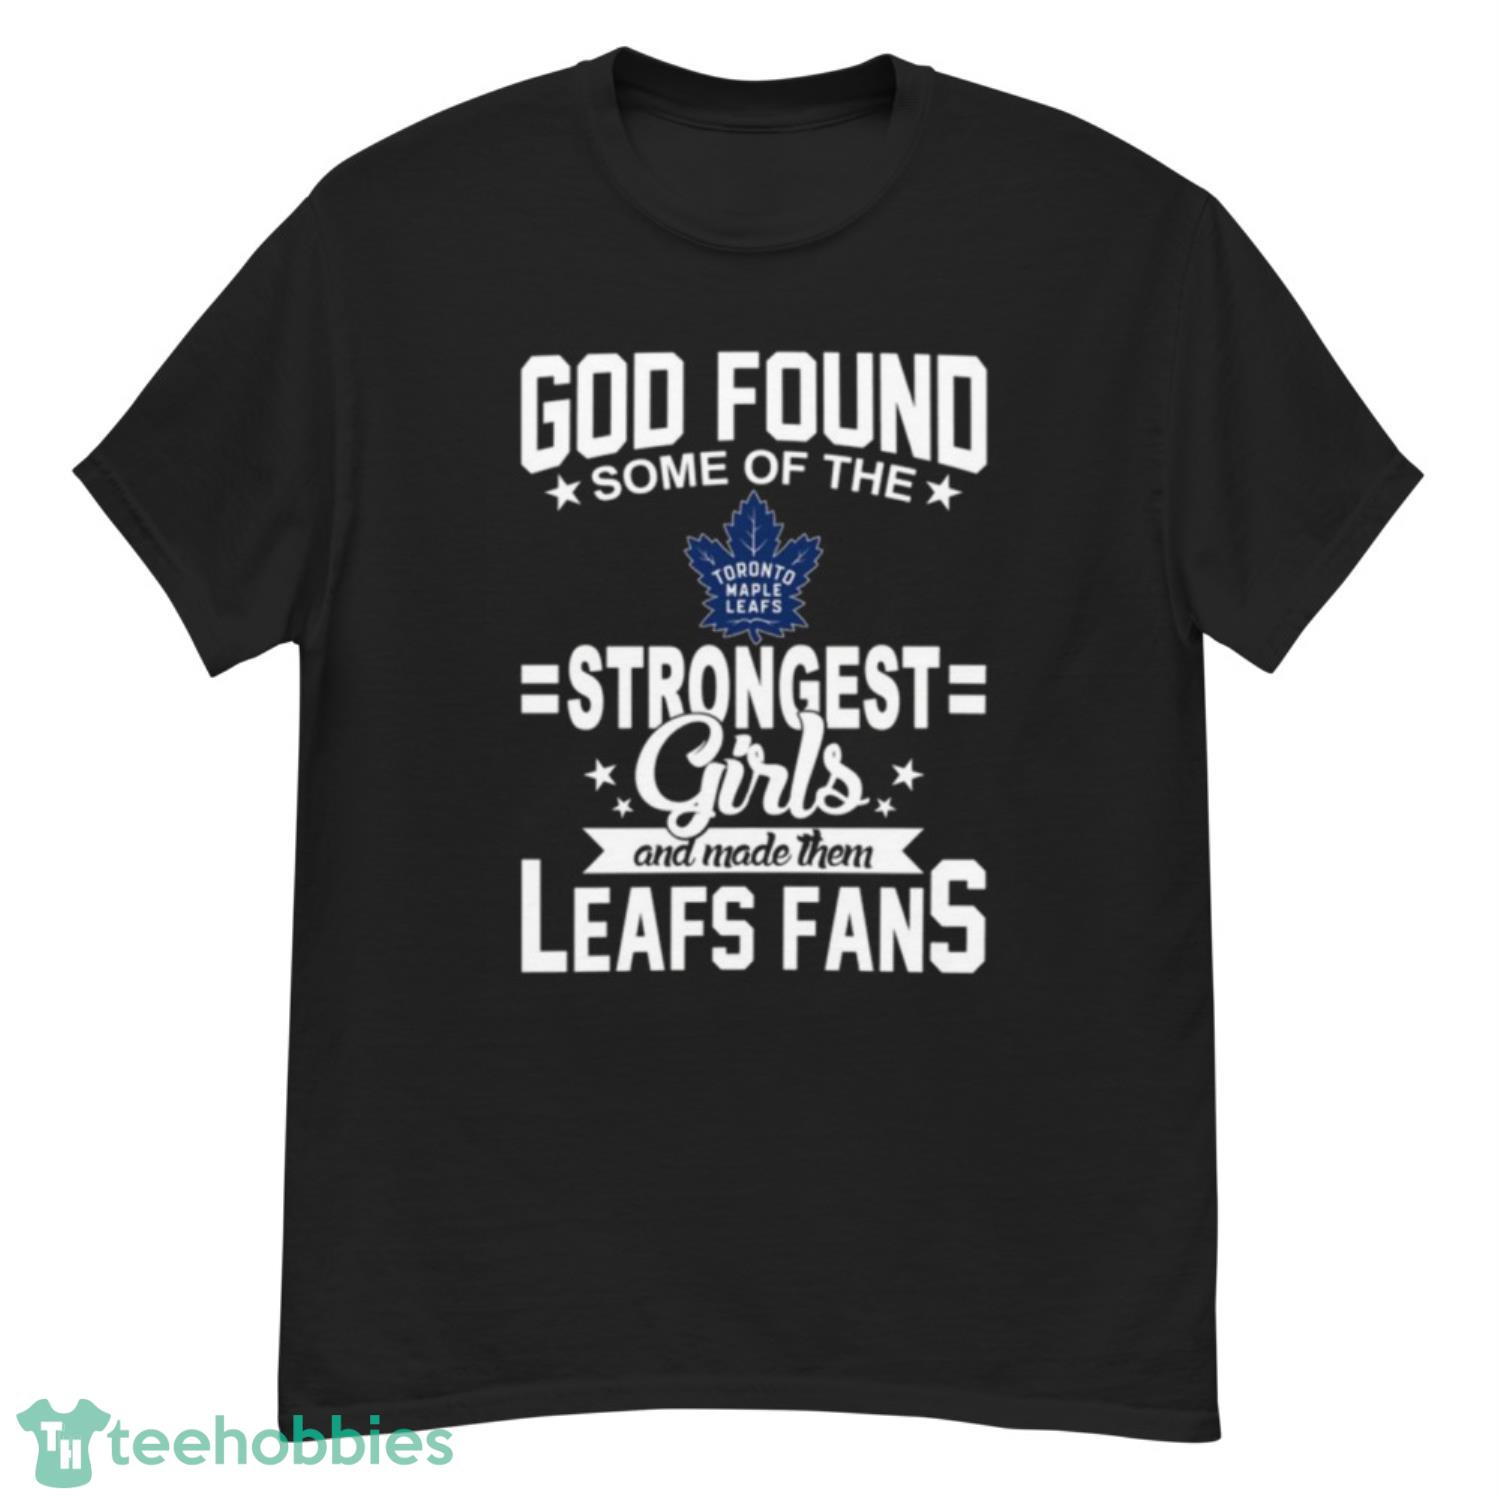 Toronto Maple Leafs NHL Football God Found Some Of The Strongest Girls Adoring Fans T Shirt - G500 Men’s Classic T-Shirt